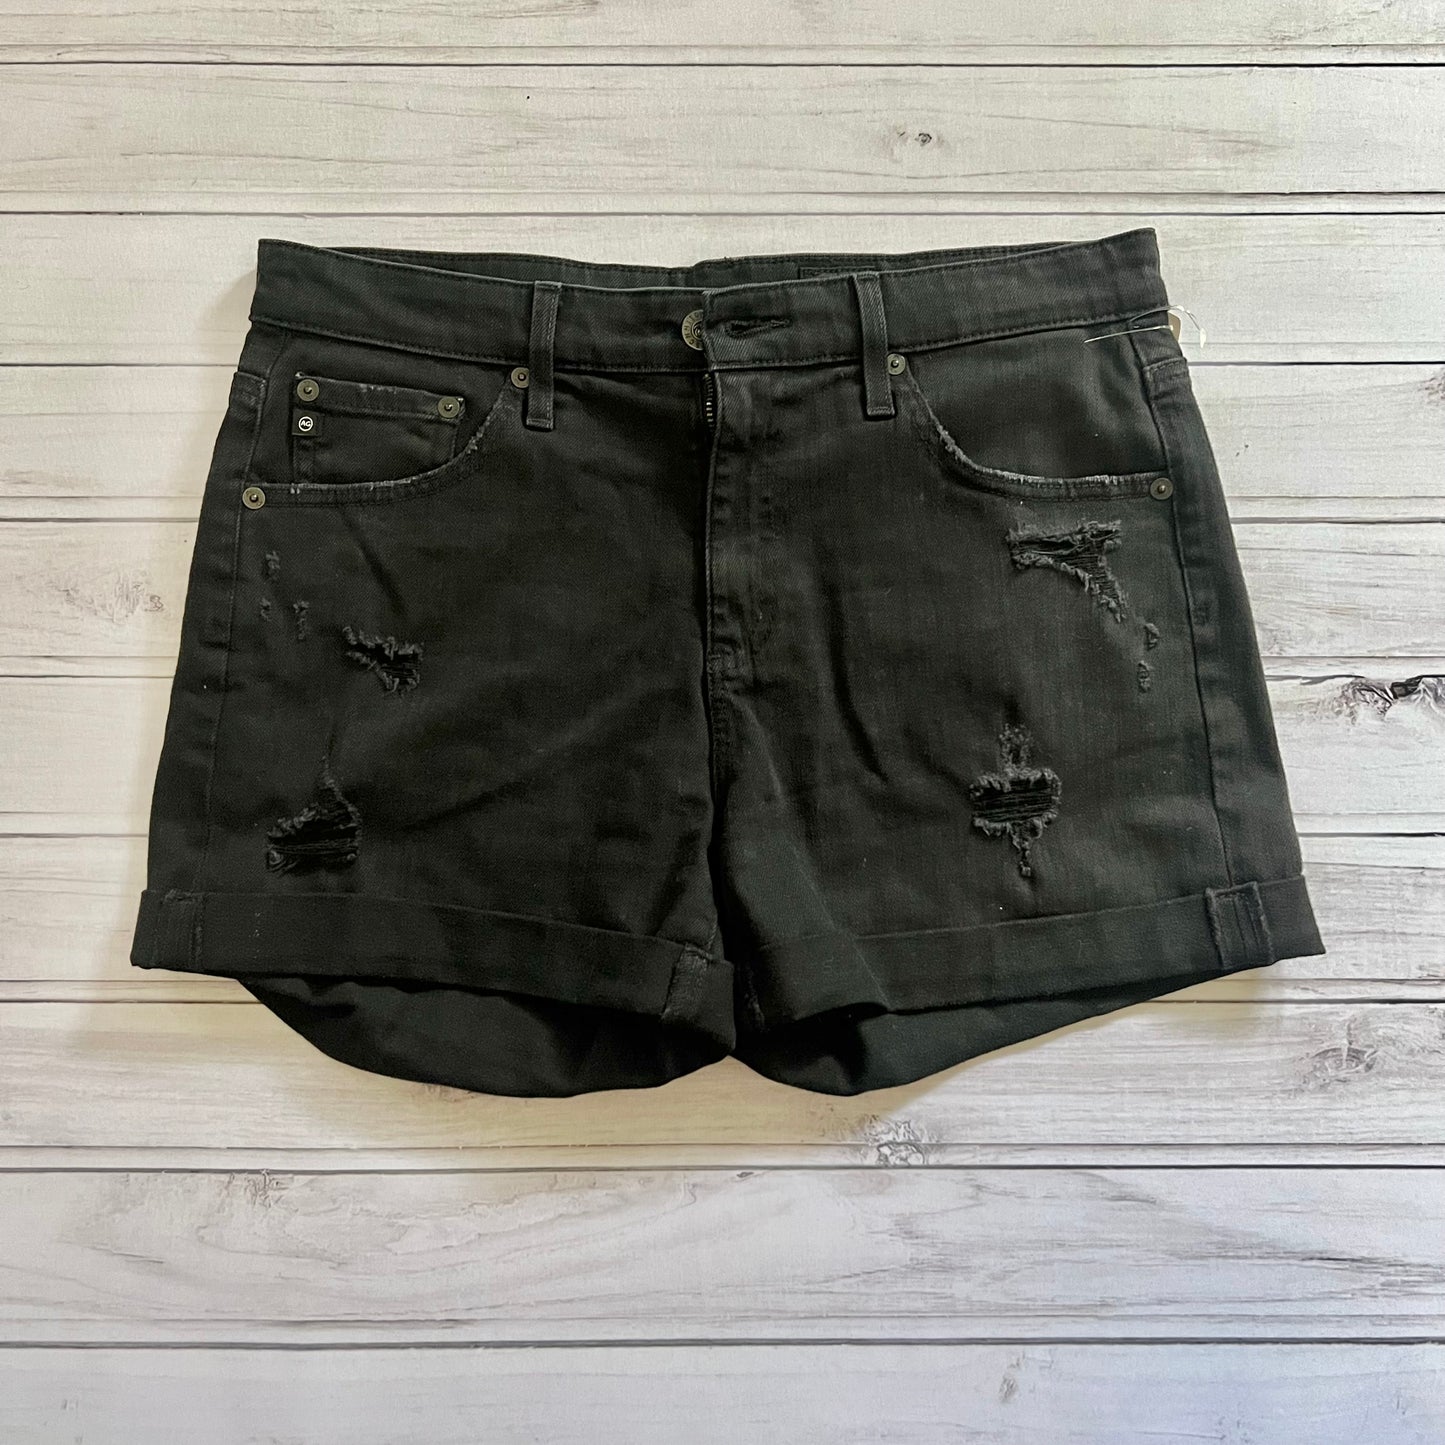 Shorts By Adriano Goldschmied  Size: 6